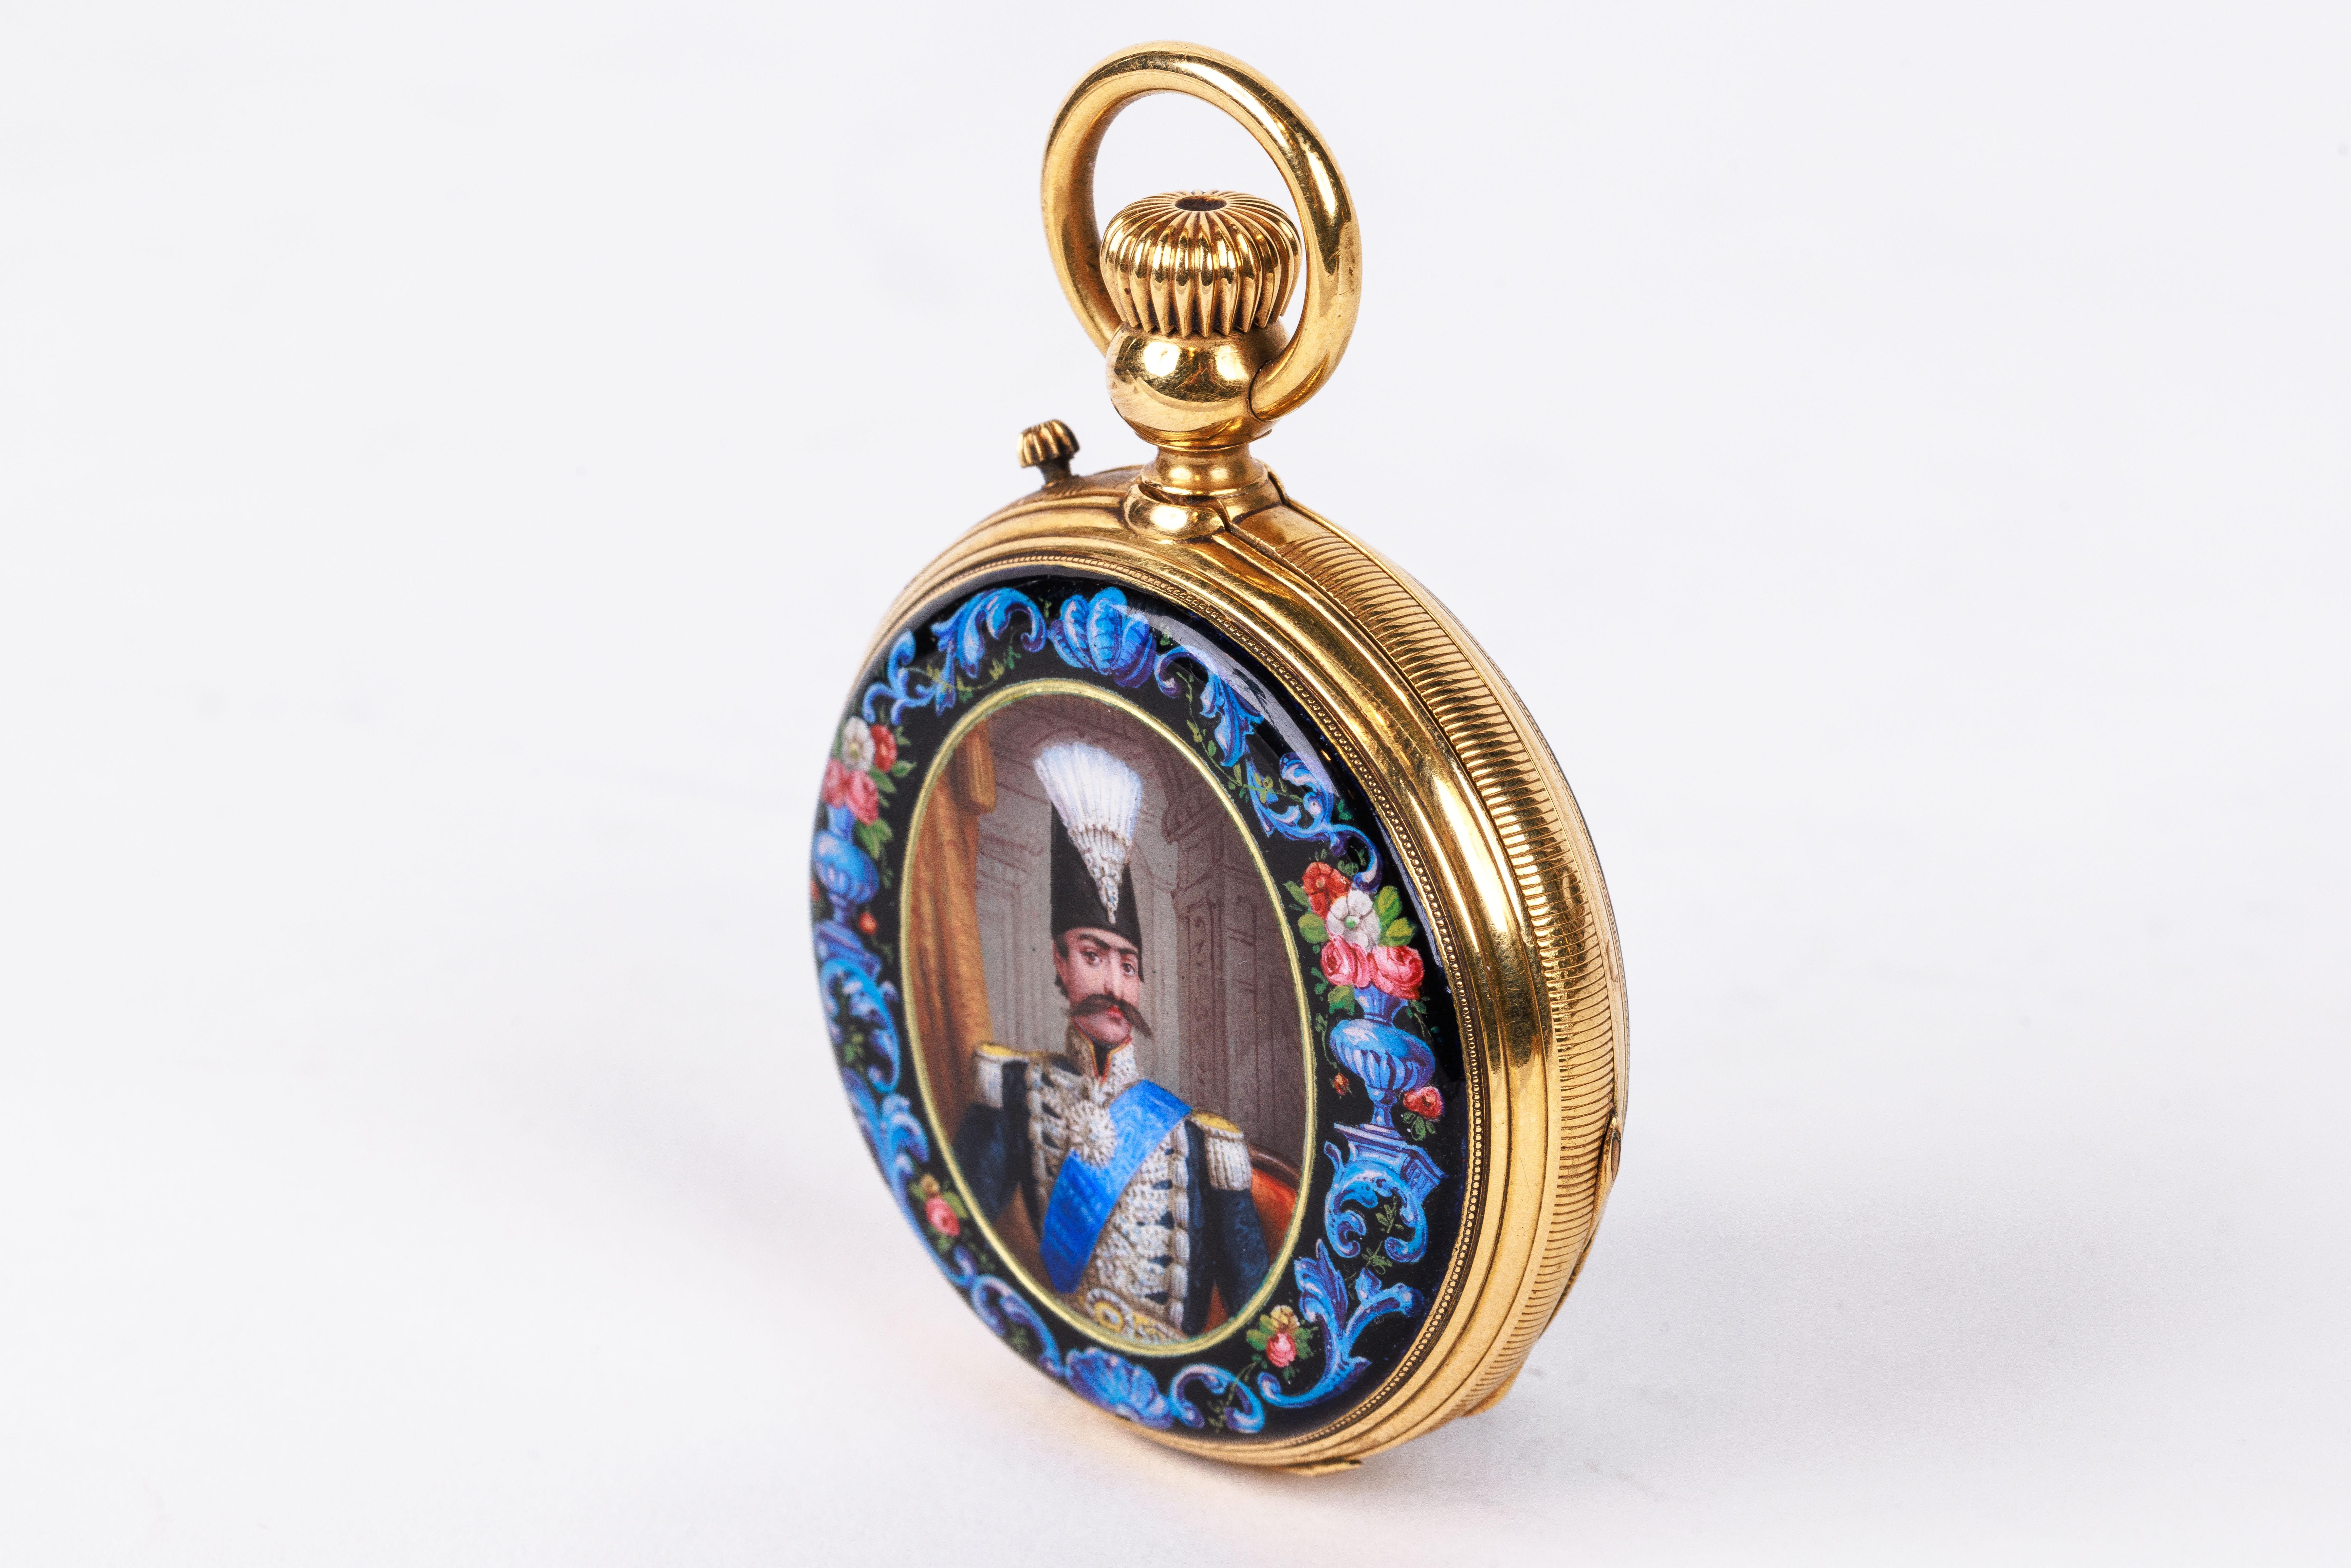 Rare Gold and Enamel Presentation Pocket Watch with Portrait of Naser Shah For Sale 3